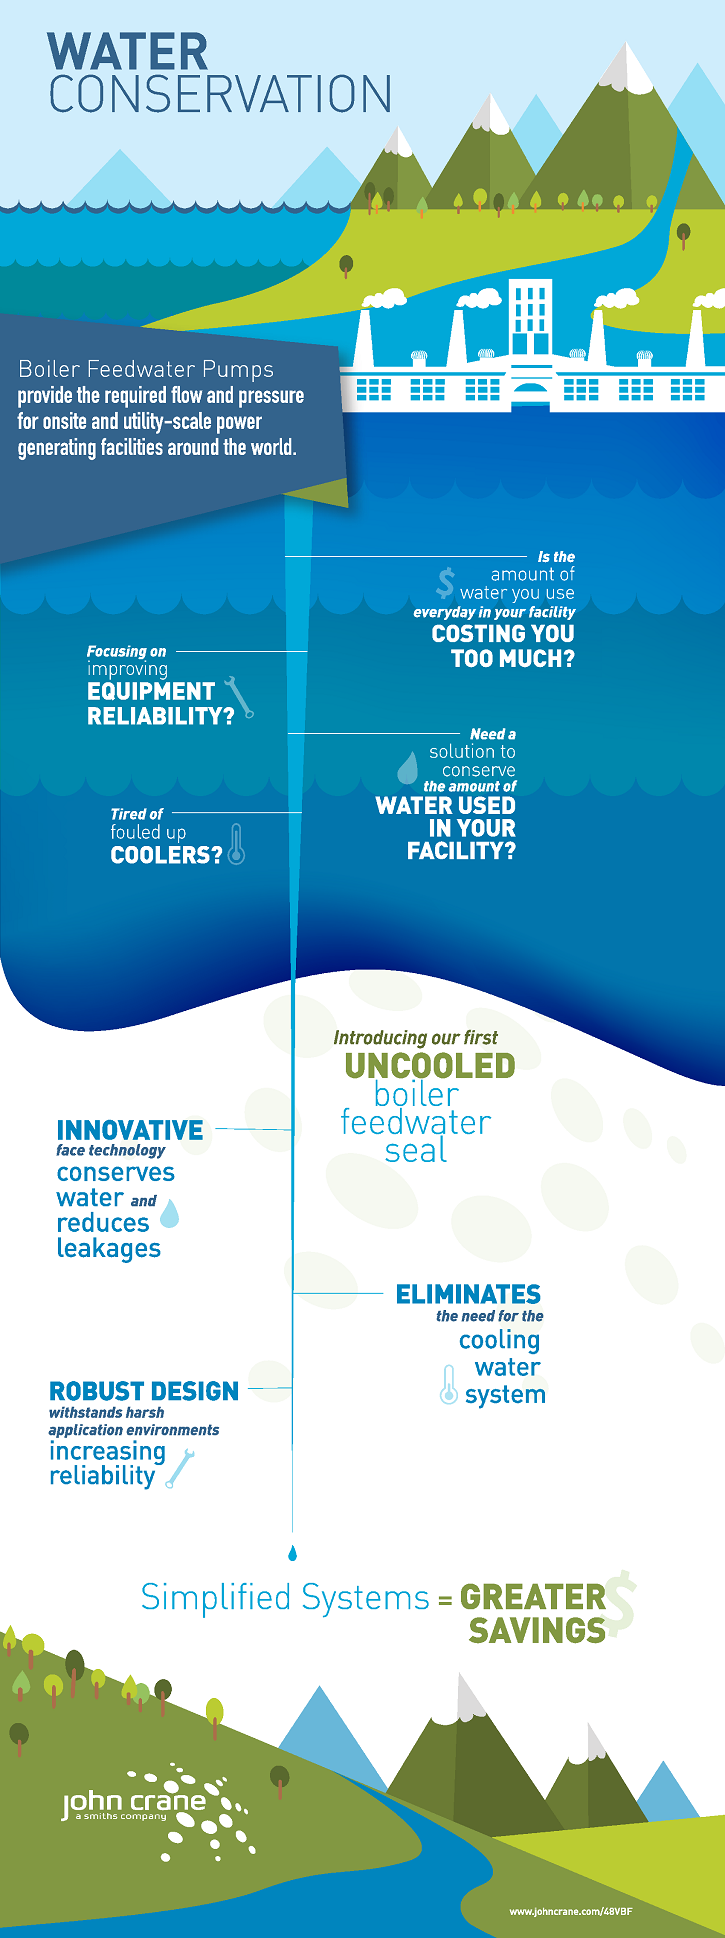 Water Conservation Infographic